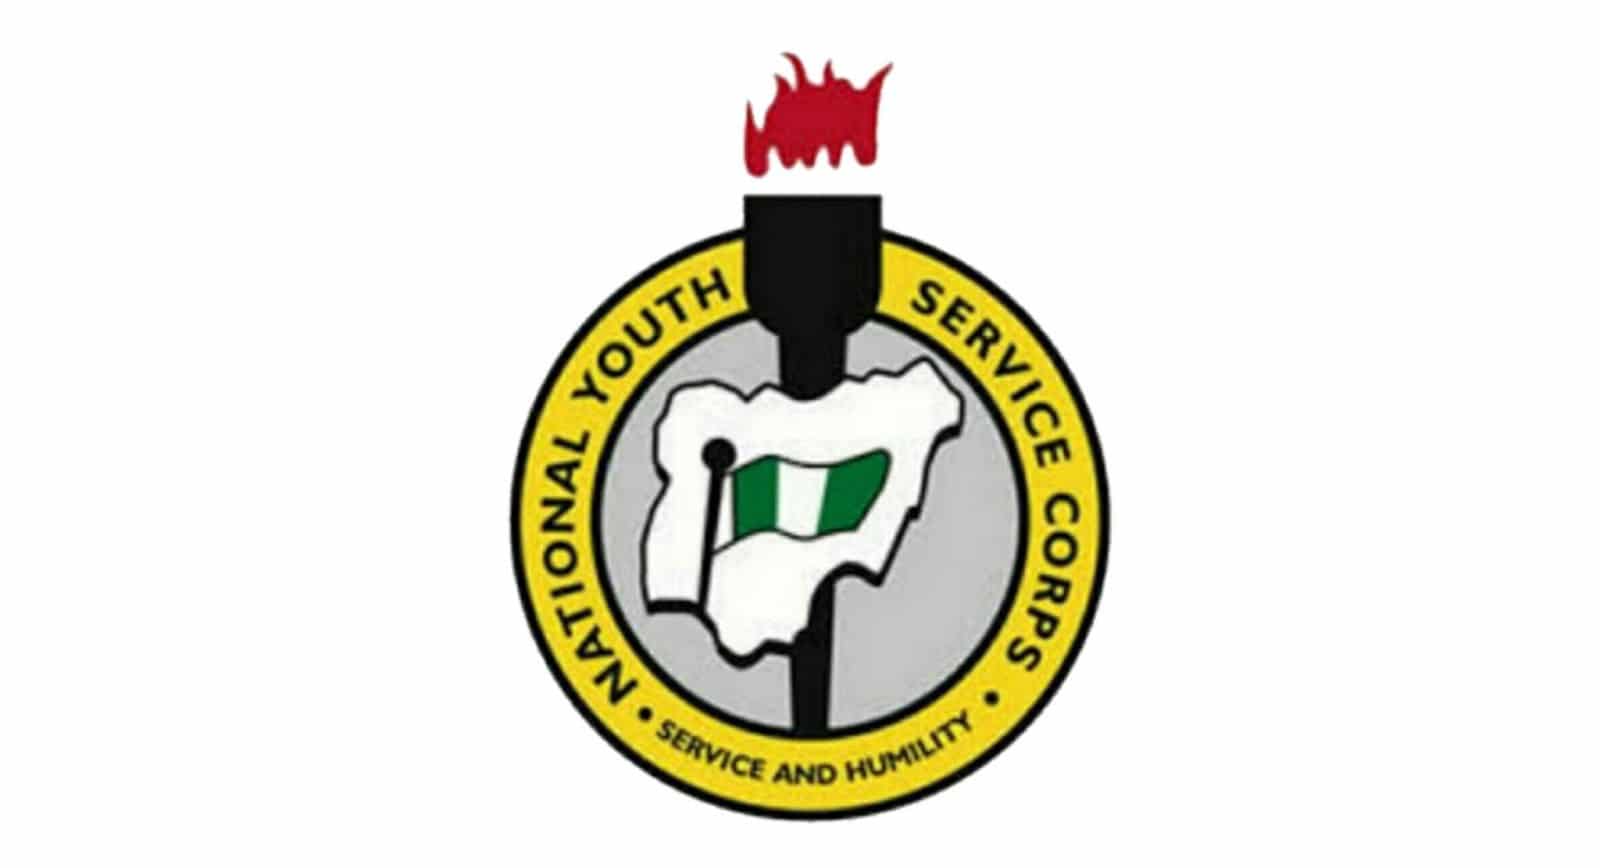 NYSC Green Card